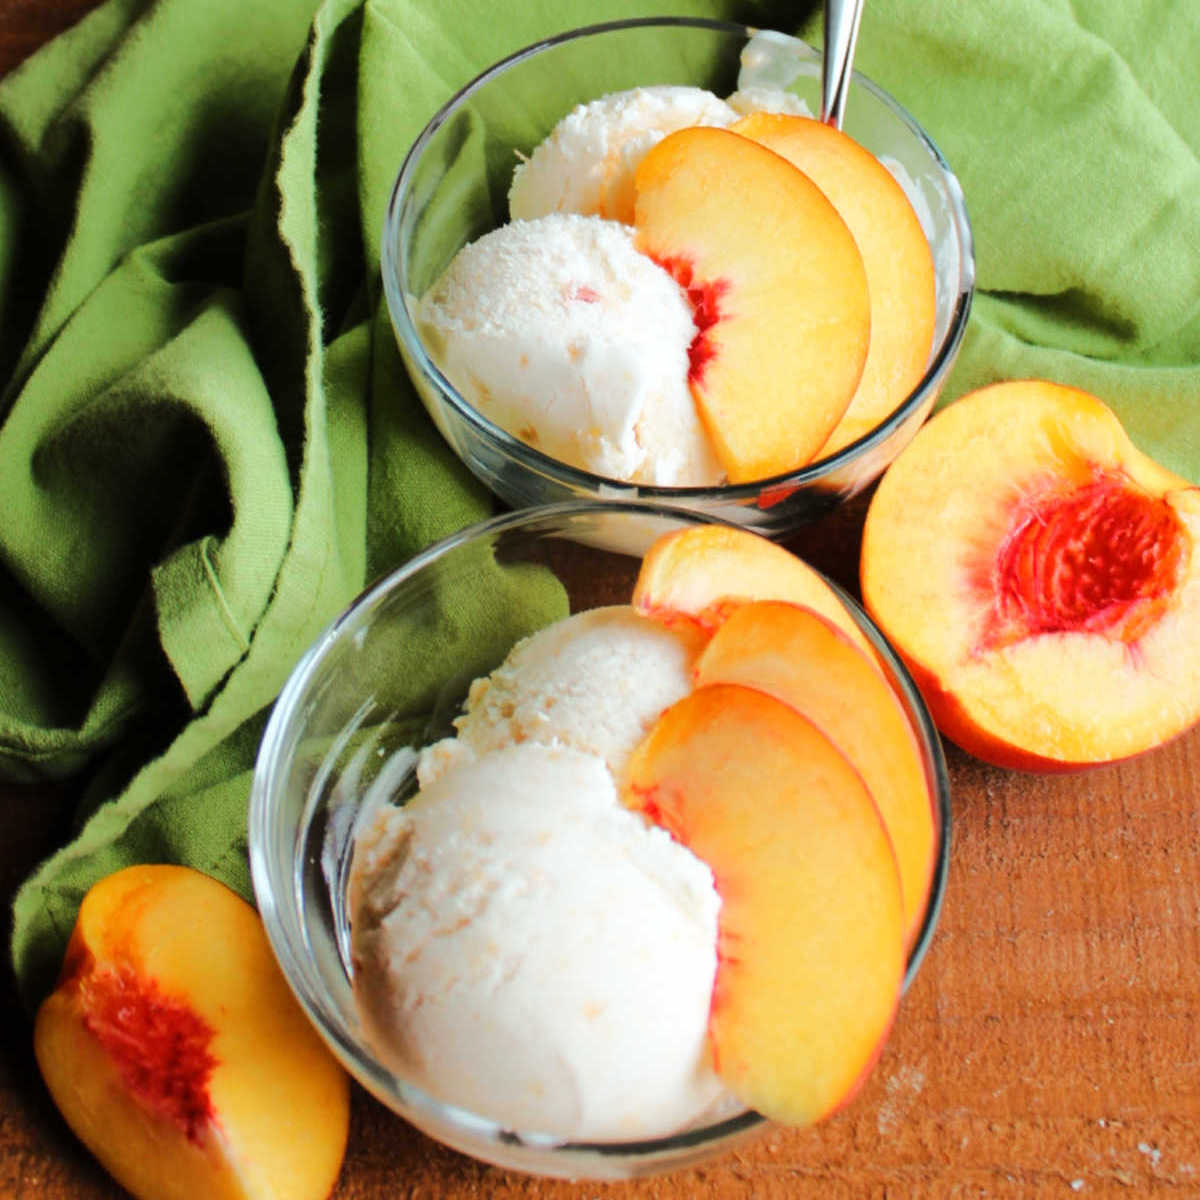 Dishes of homemade peach ice cream with slices of fresh peach on top.